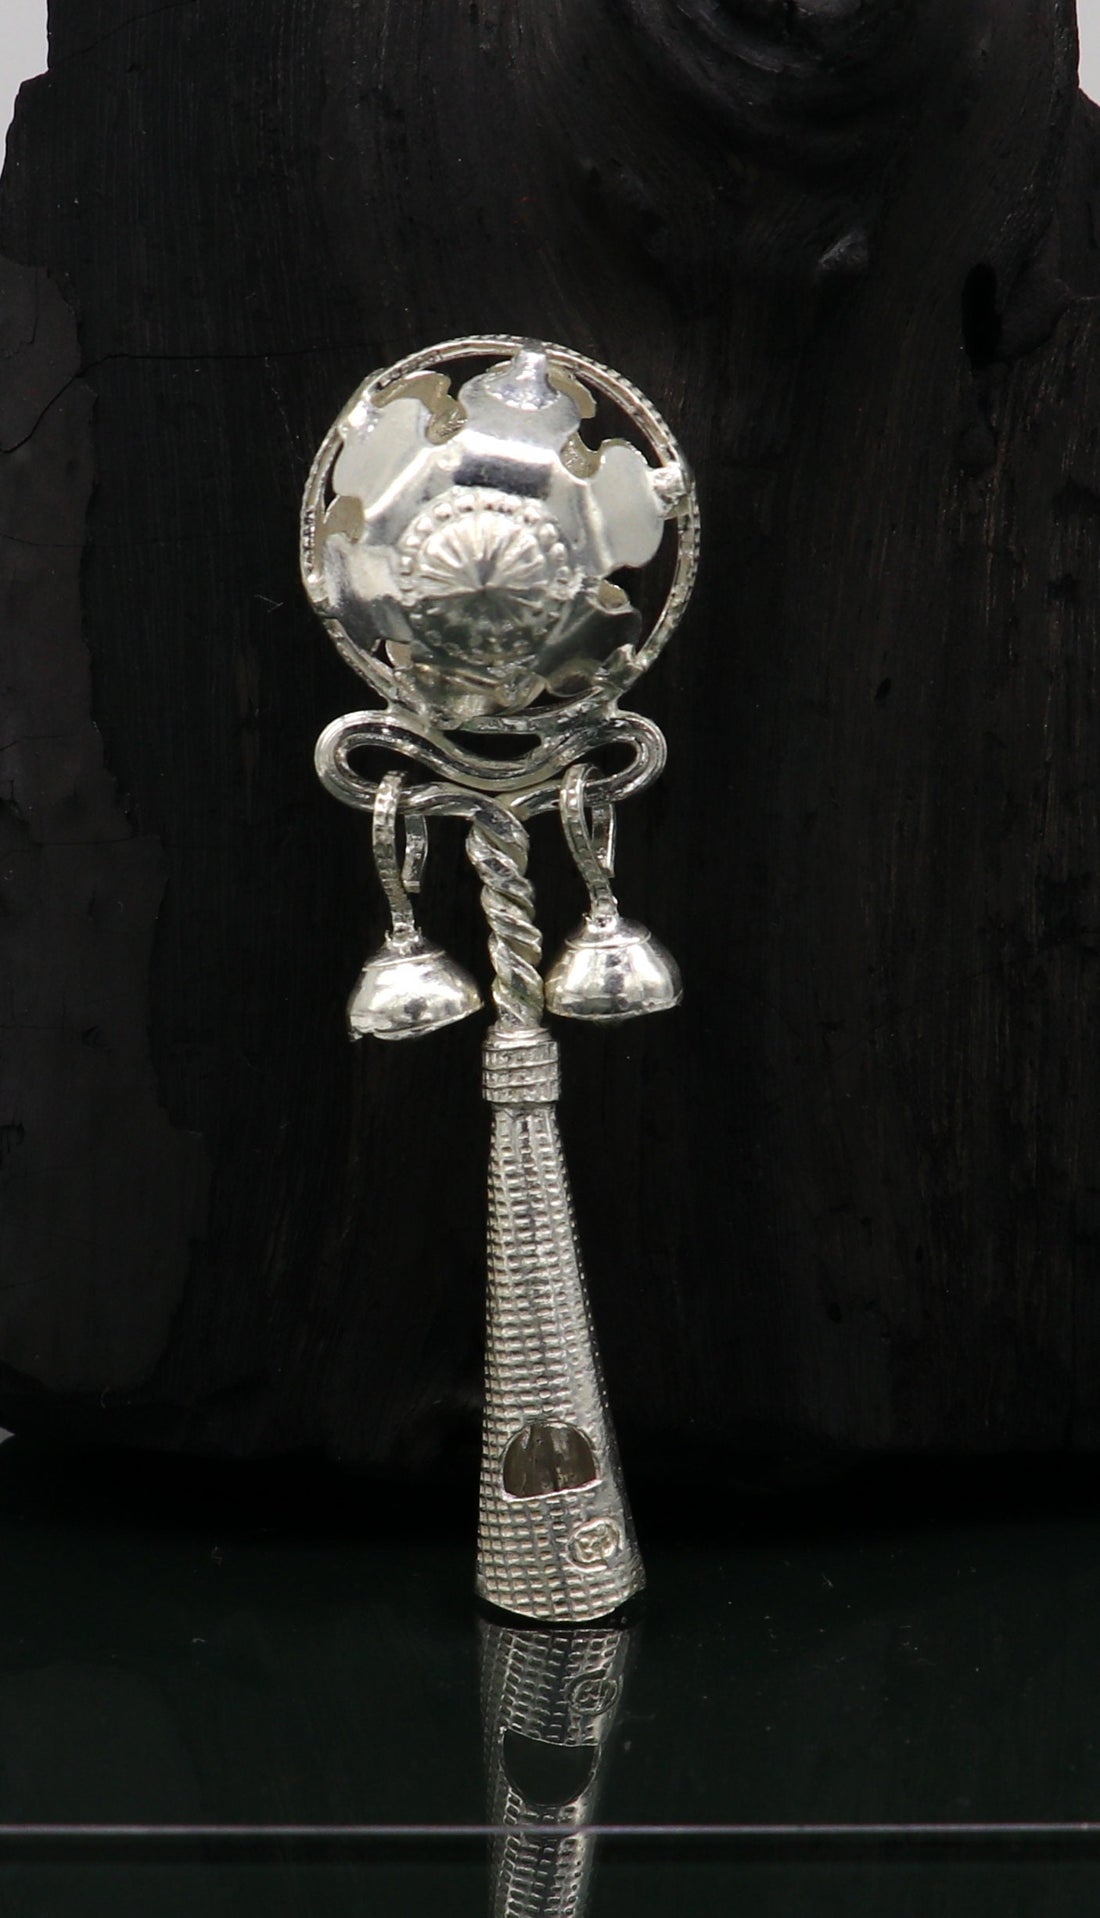 Solid sterling silver handmade design new born baby gifting bells toy, baby krishna gifting toy, silver whistle, silver temple article su192 - TRIBAL ORNAMENTS